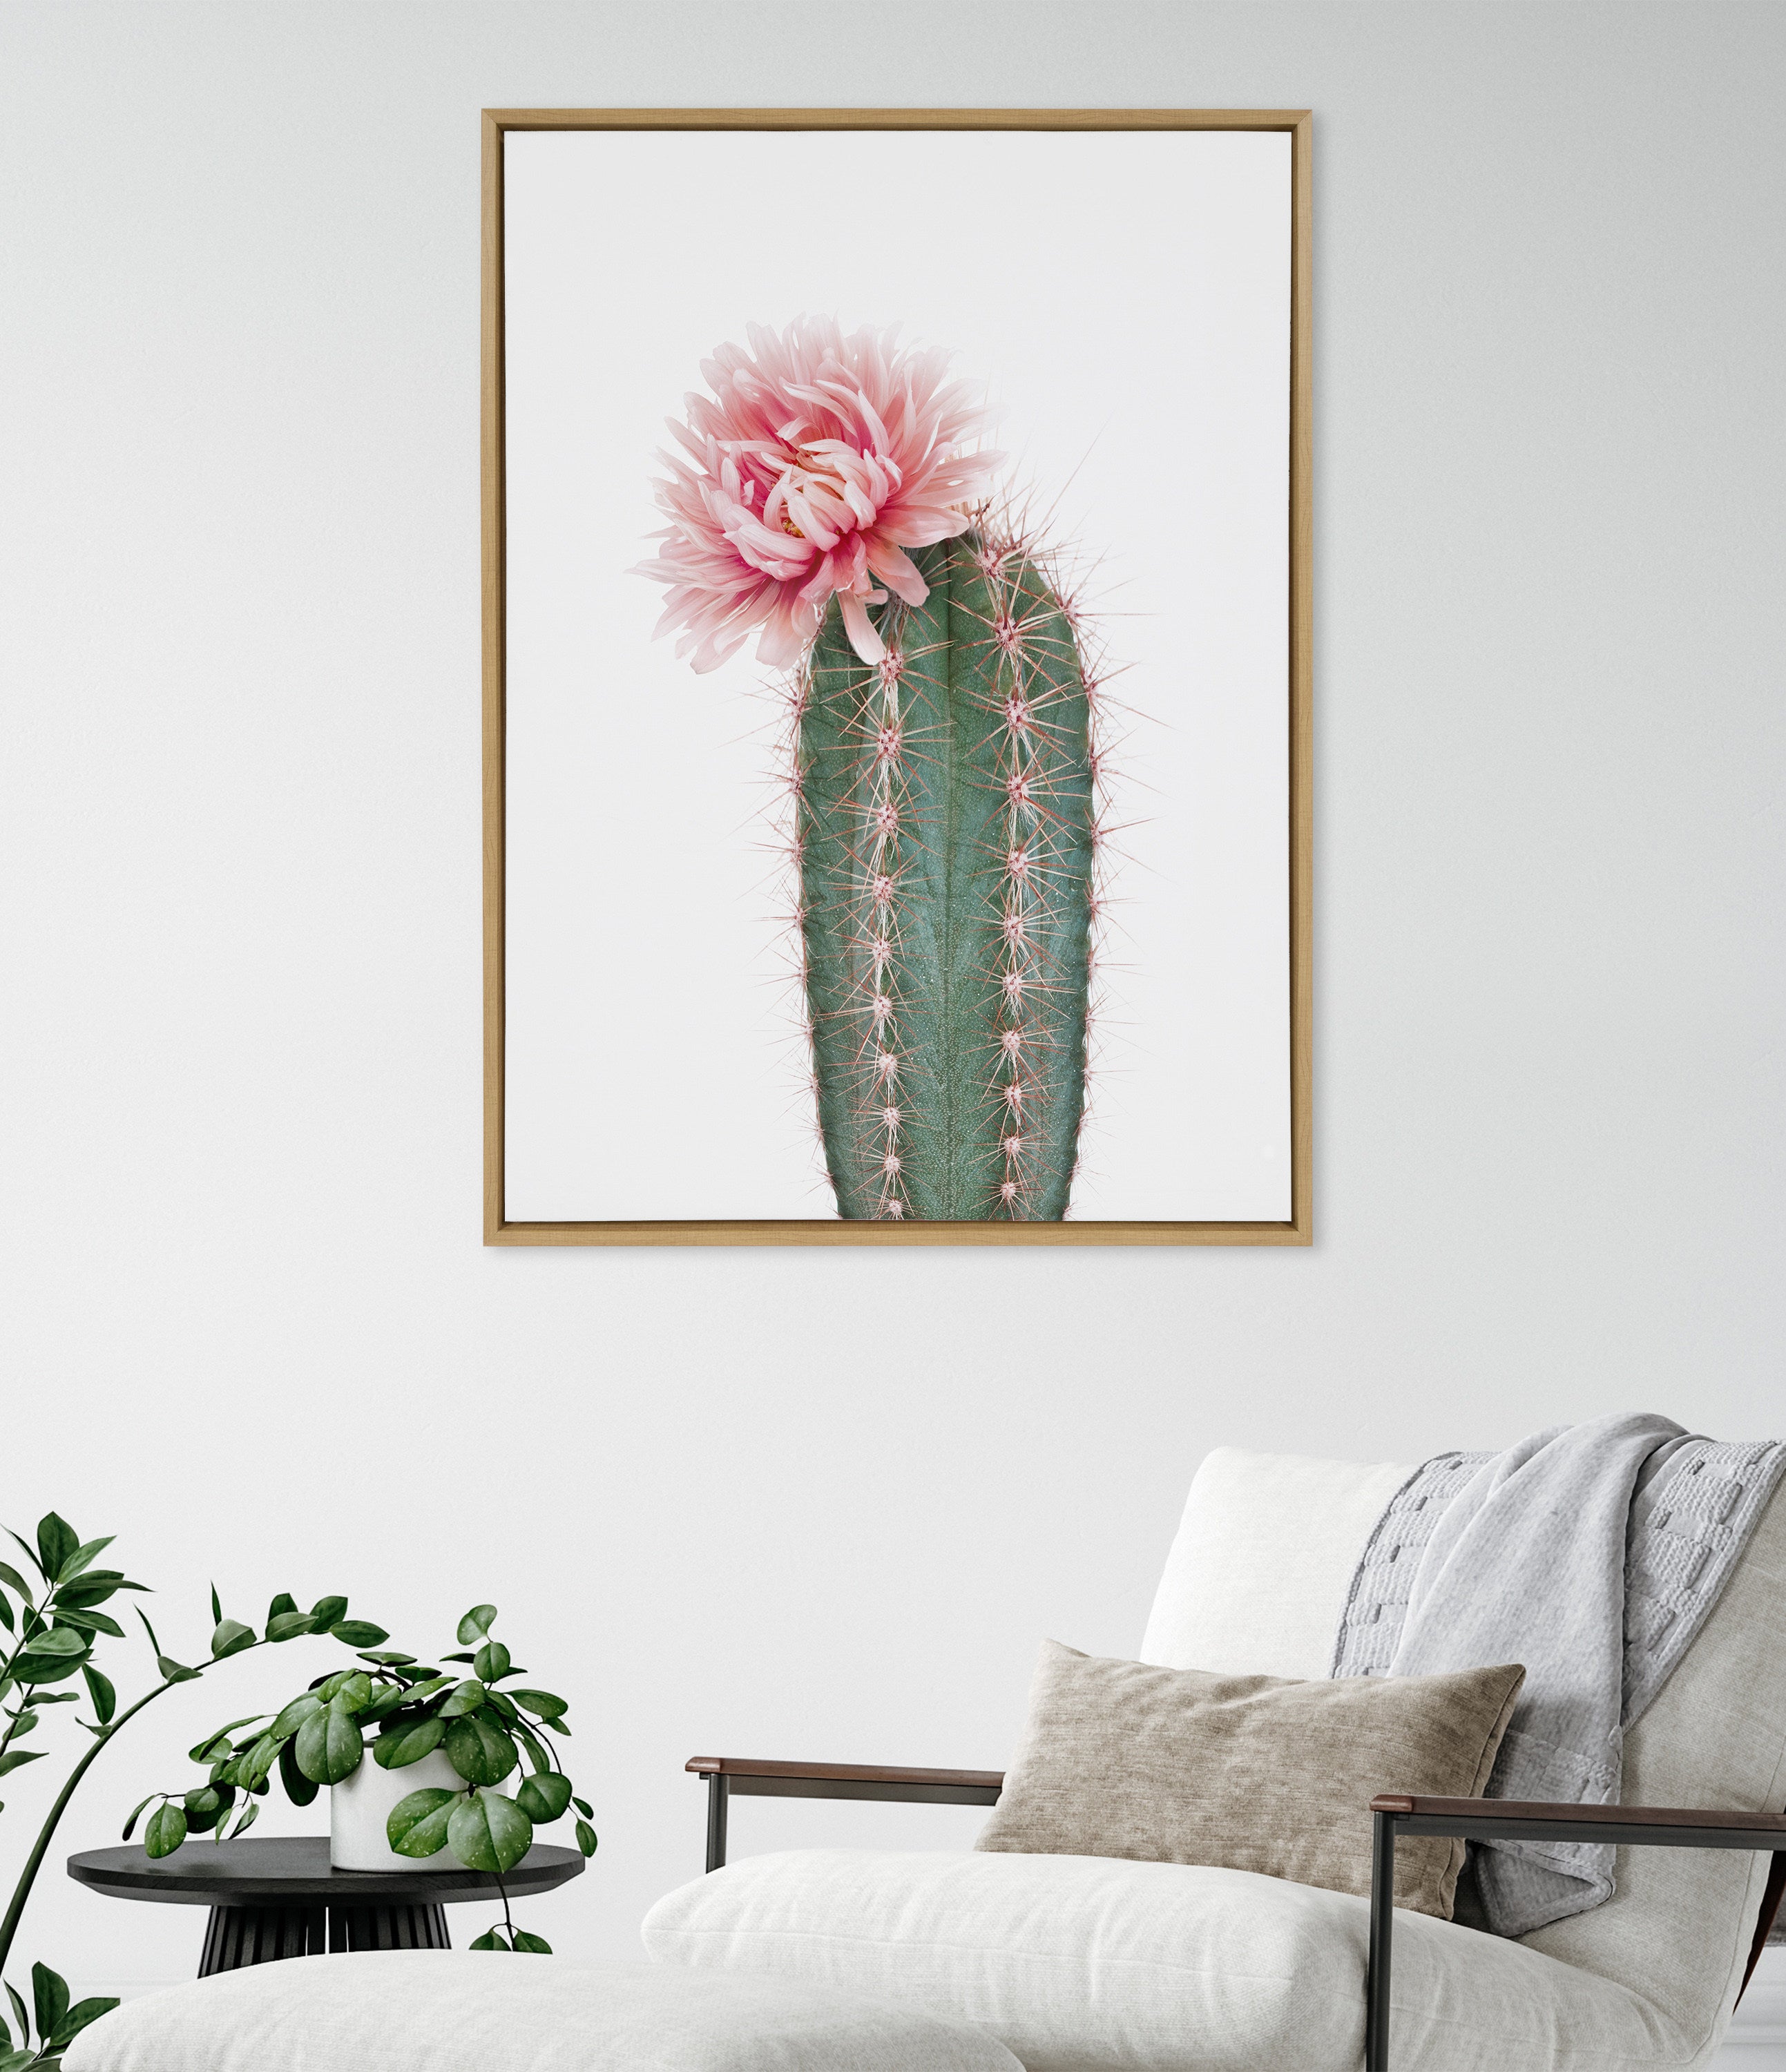 Sylvie Pink Cactus Flower Framed Canvas by Amy Peterson Art Studio